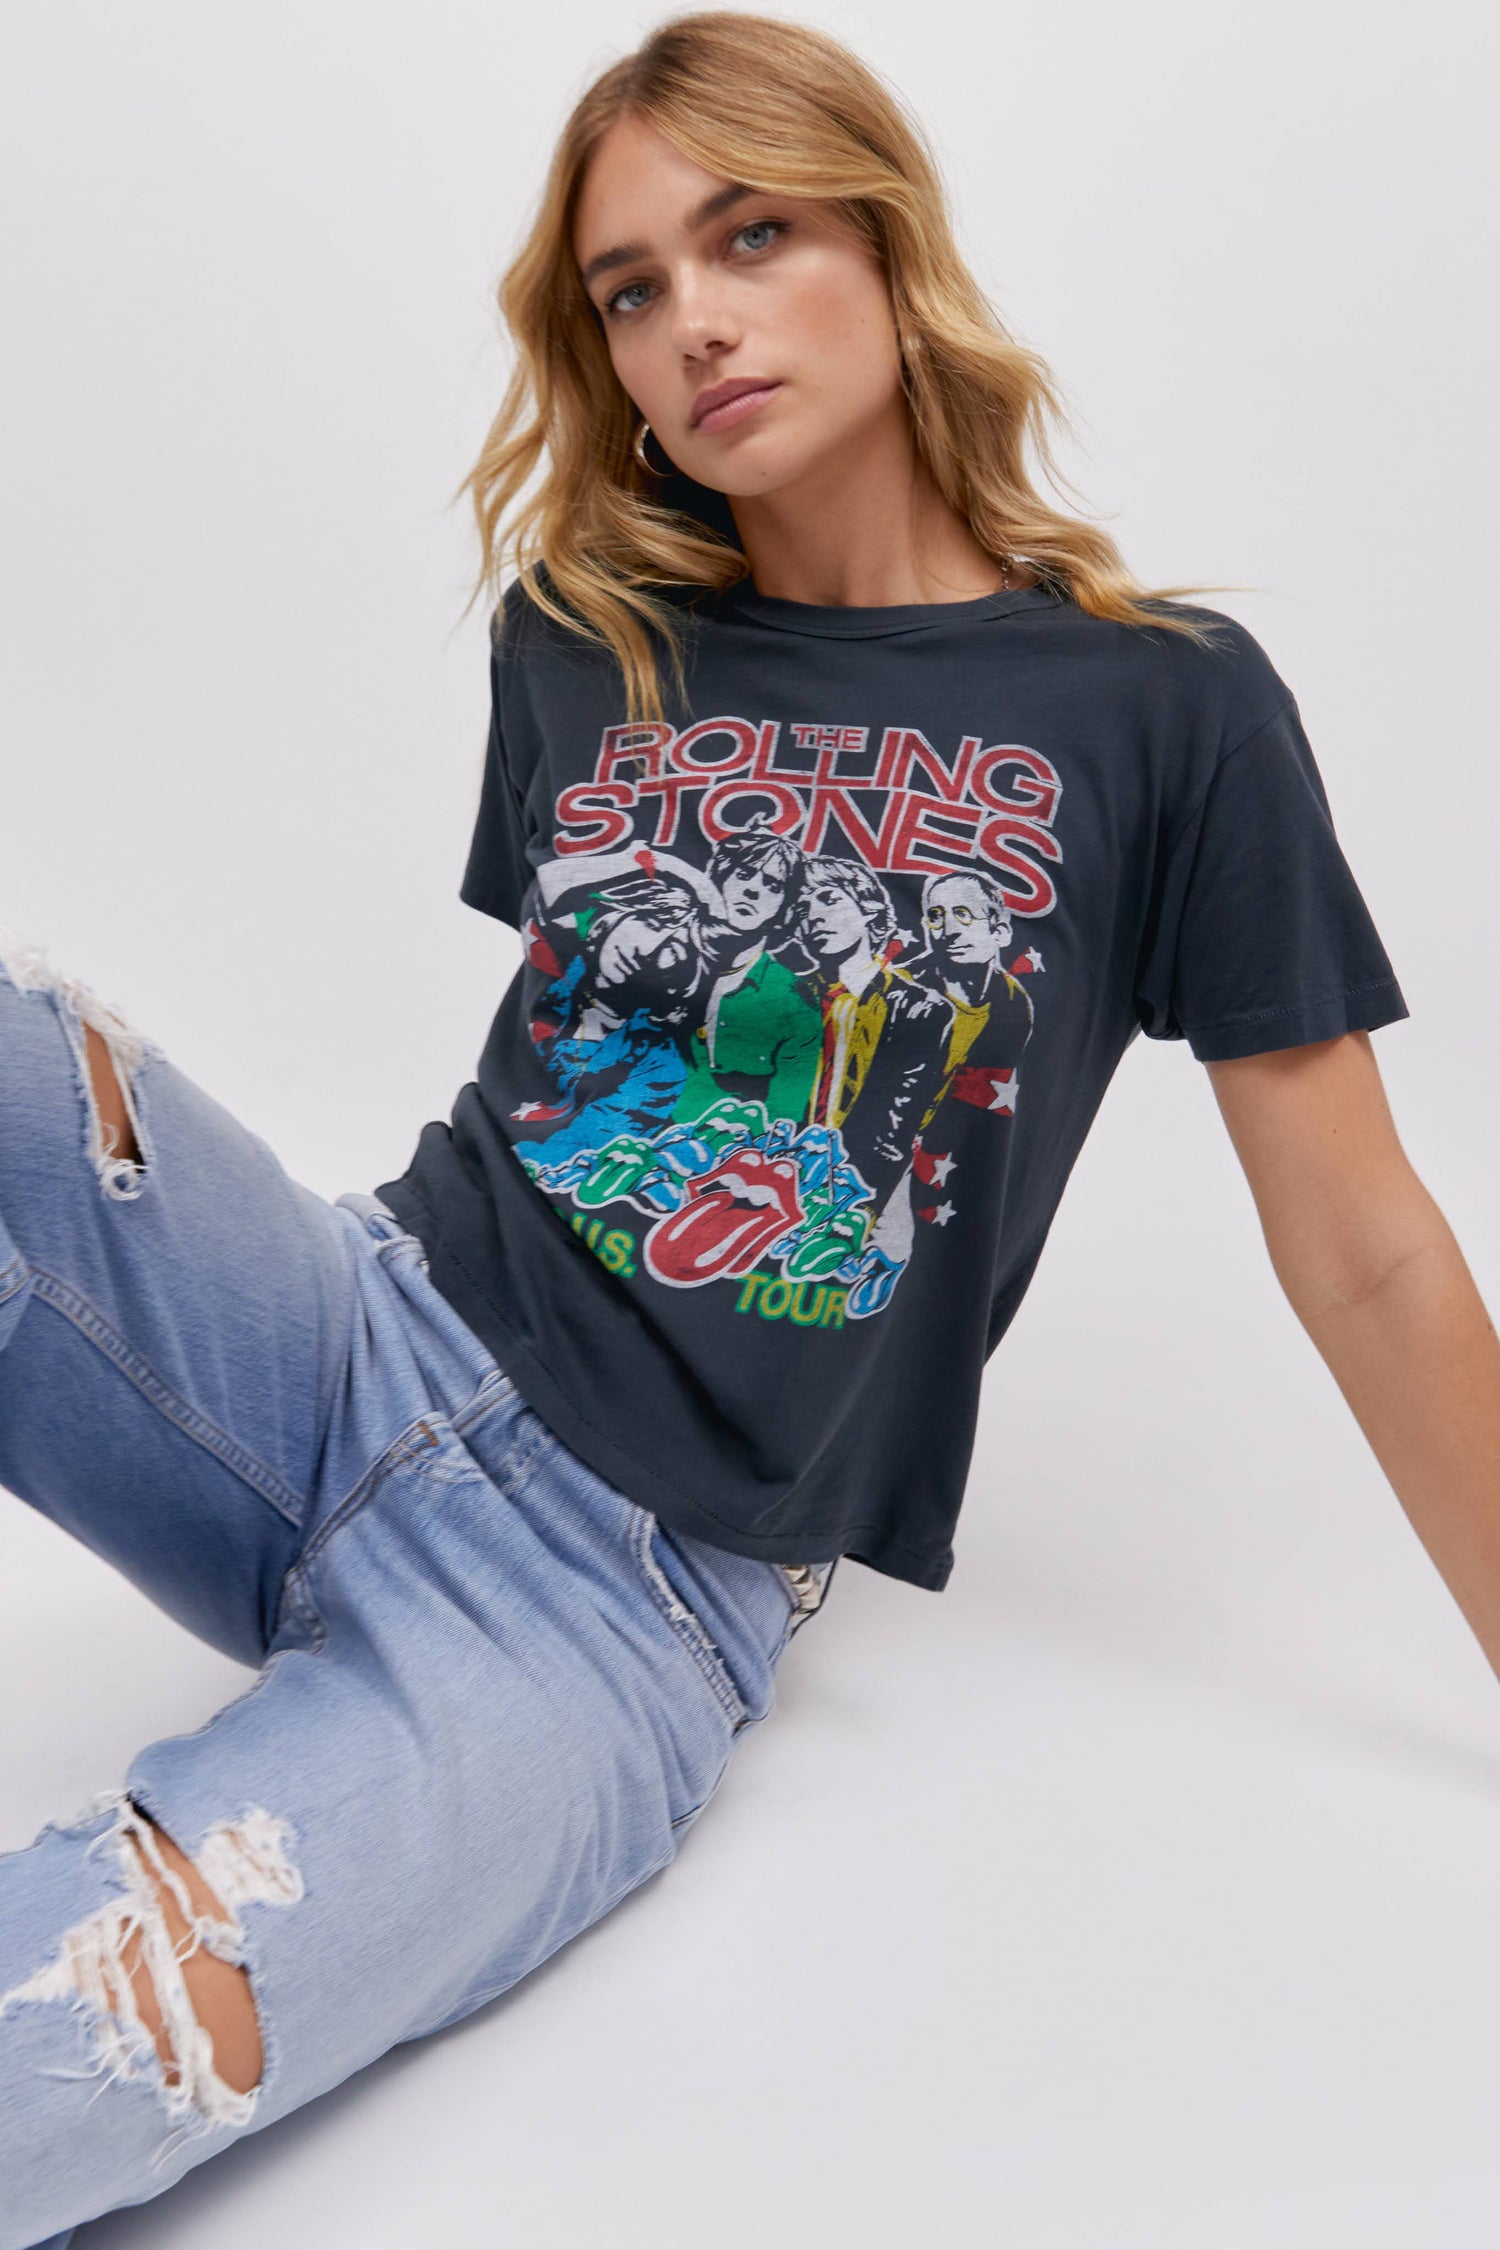 A blonde-haired model featuring a vintage black tee stamped with 'The Rolling Stones' and designed with an iconic group photo of the band.